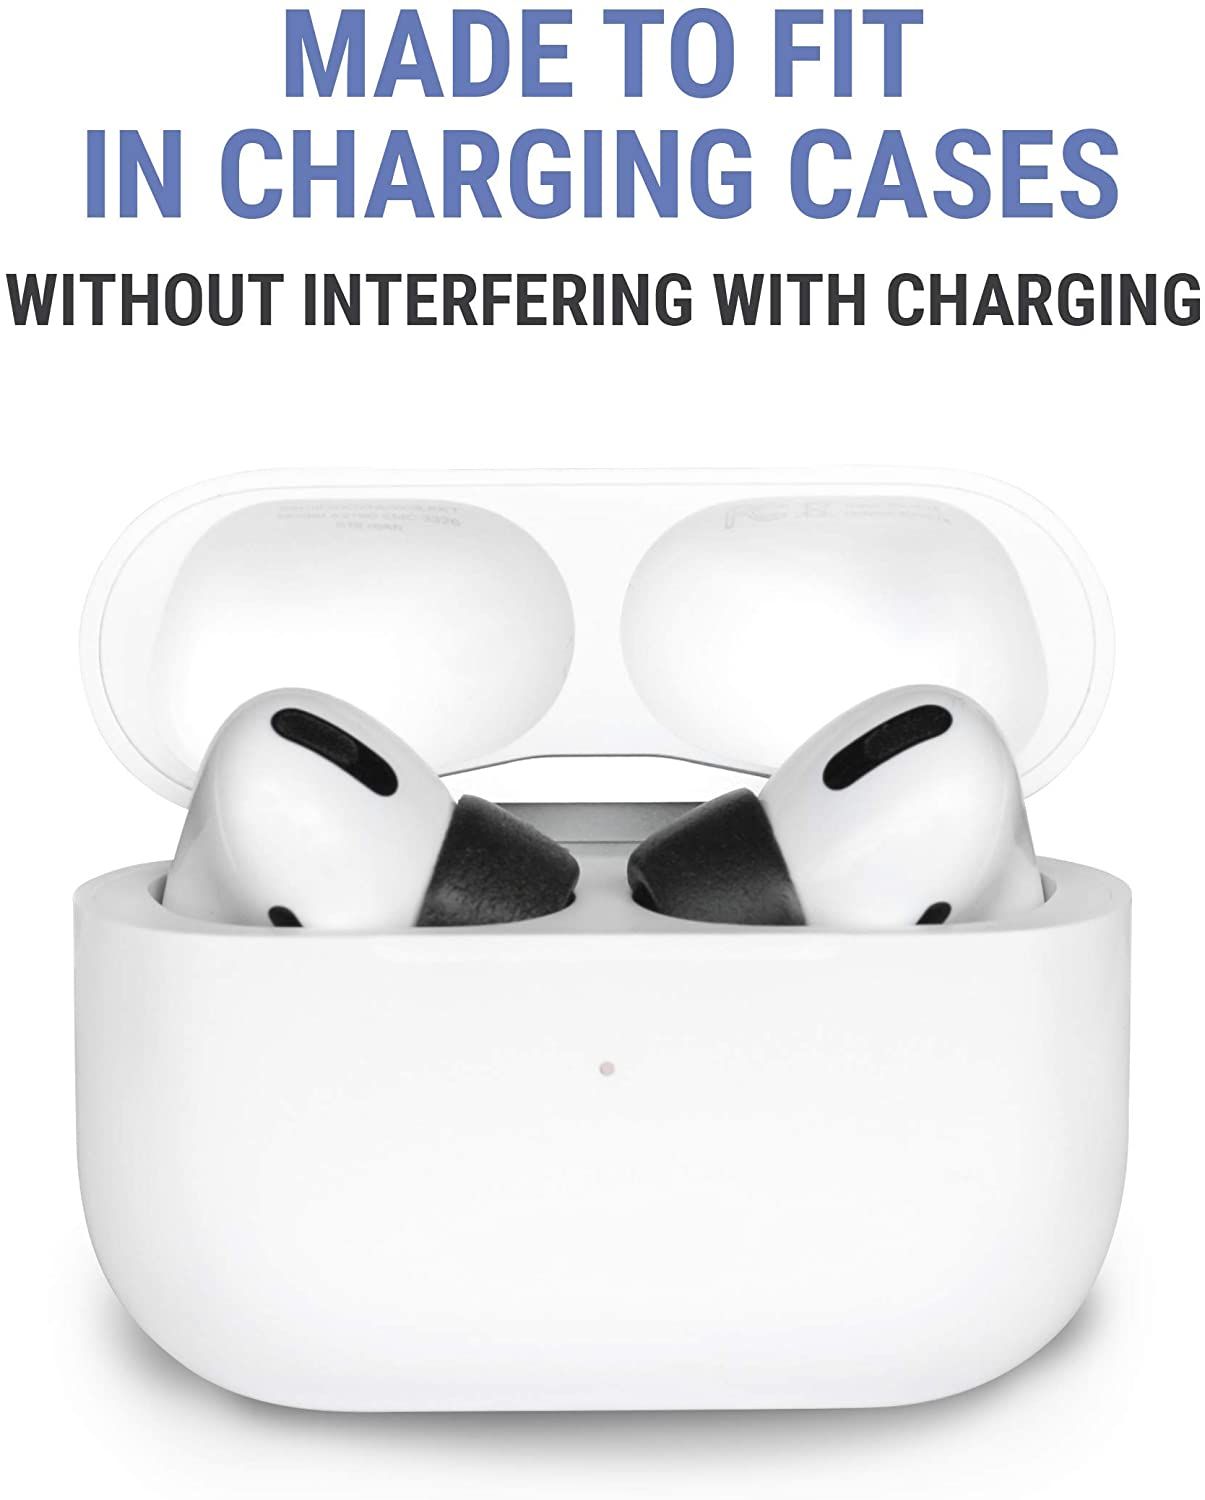 Comply AirPods Pro Foam Ear Tips wireless charging